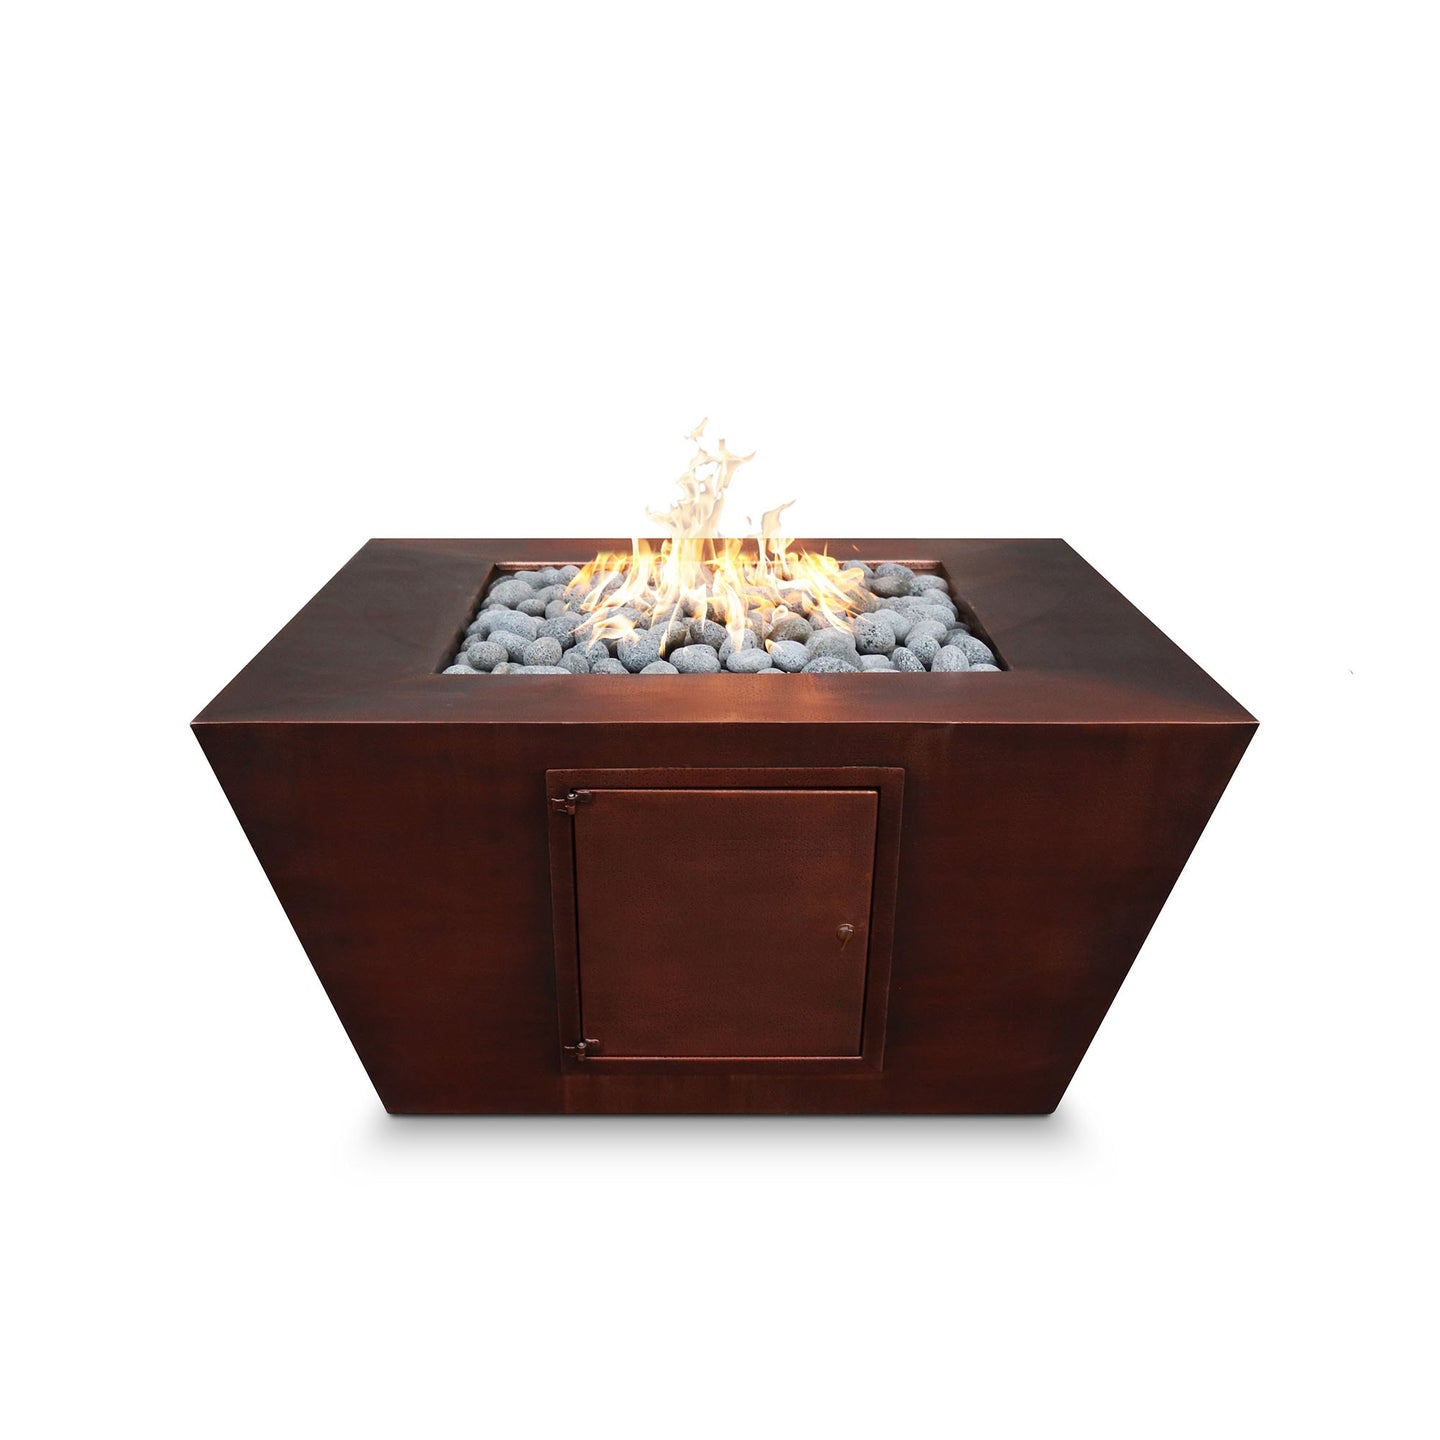 Amere Fire Pit - 02